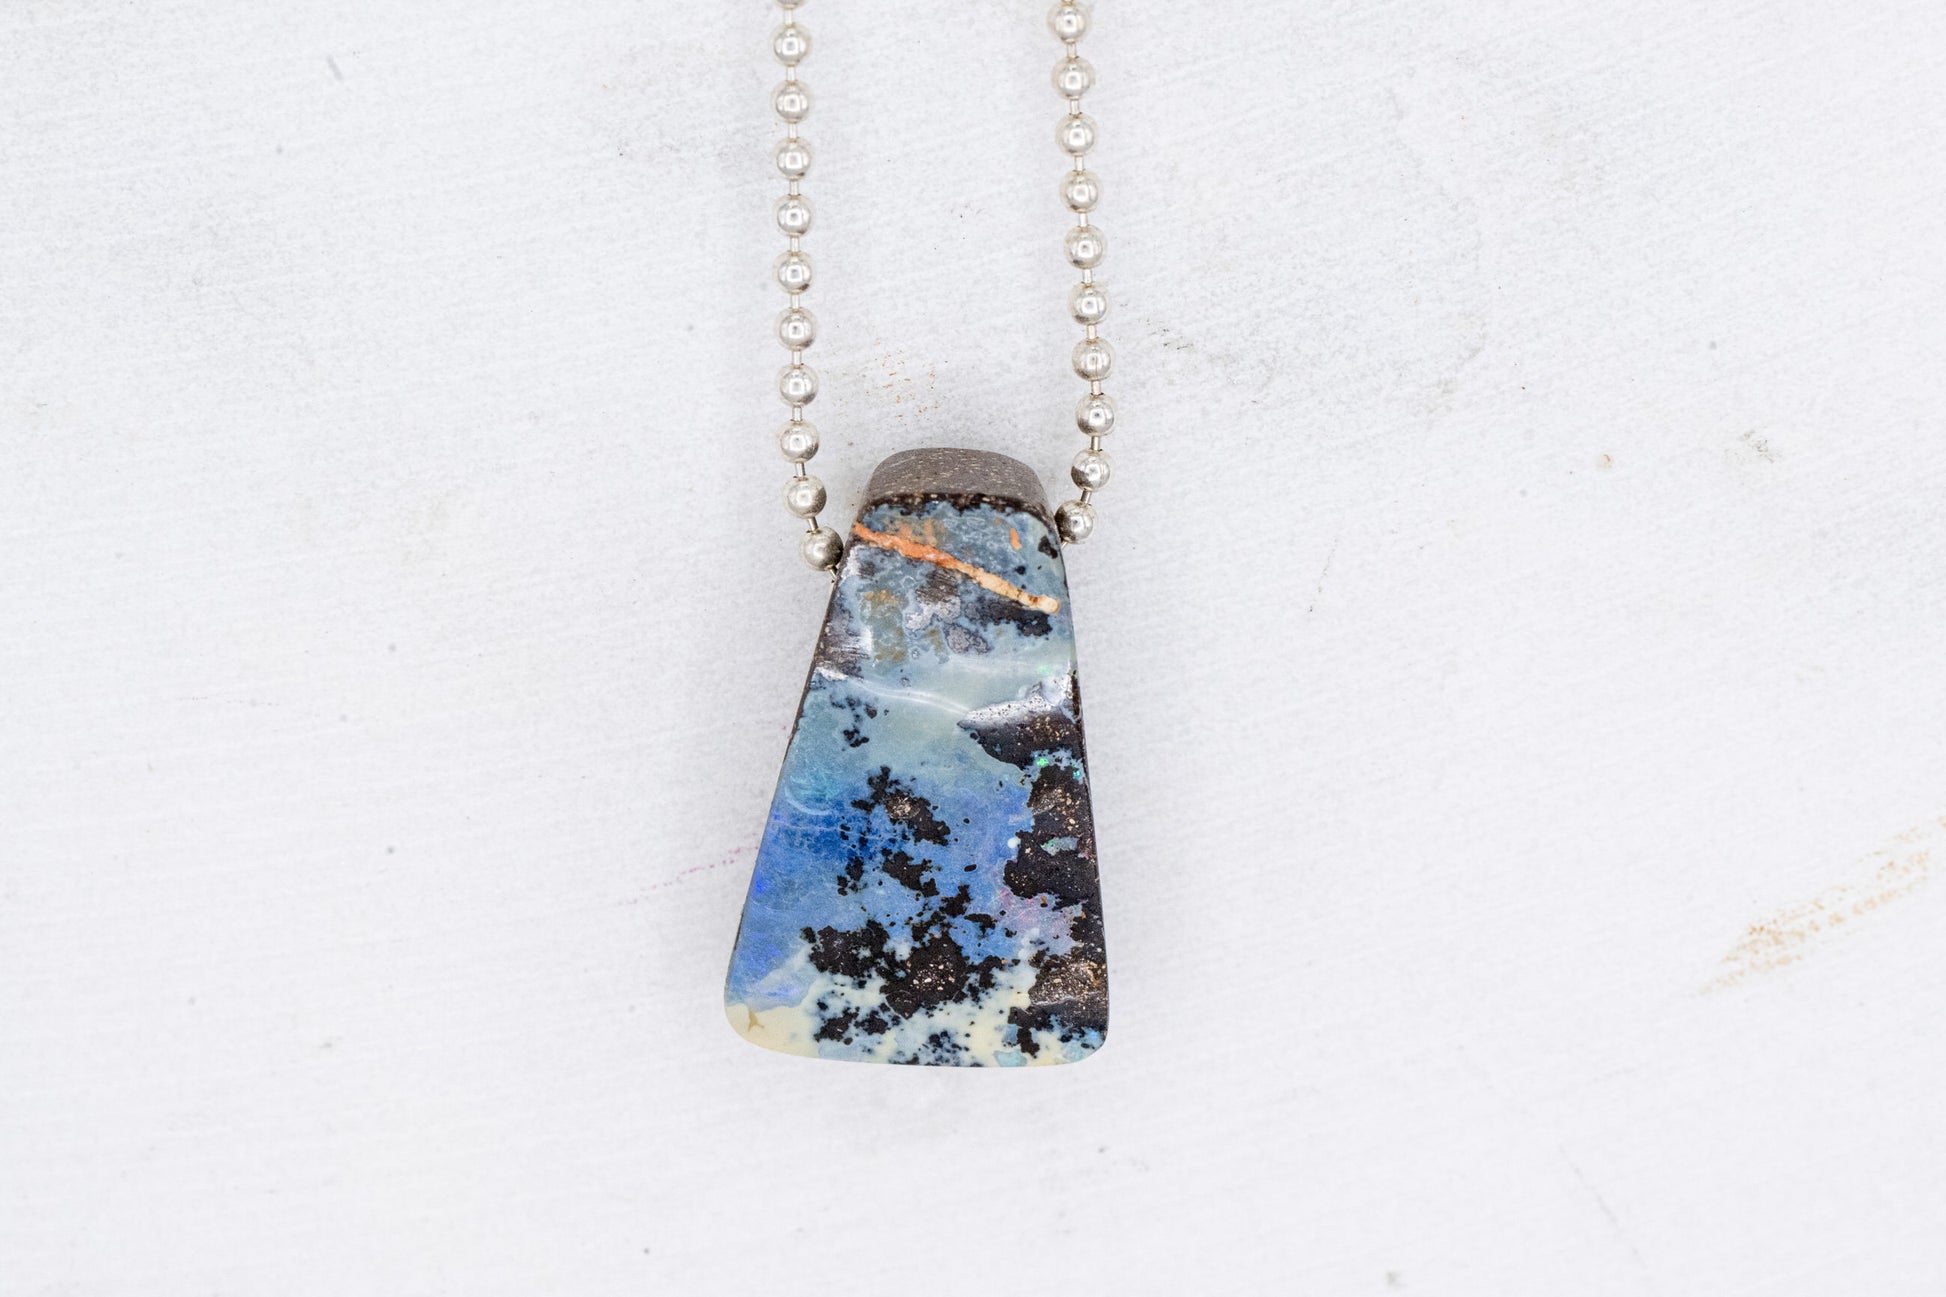 A unique Australian Opal Necklace with handmade jewelry and a blue stone.